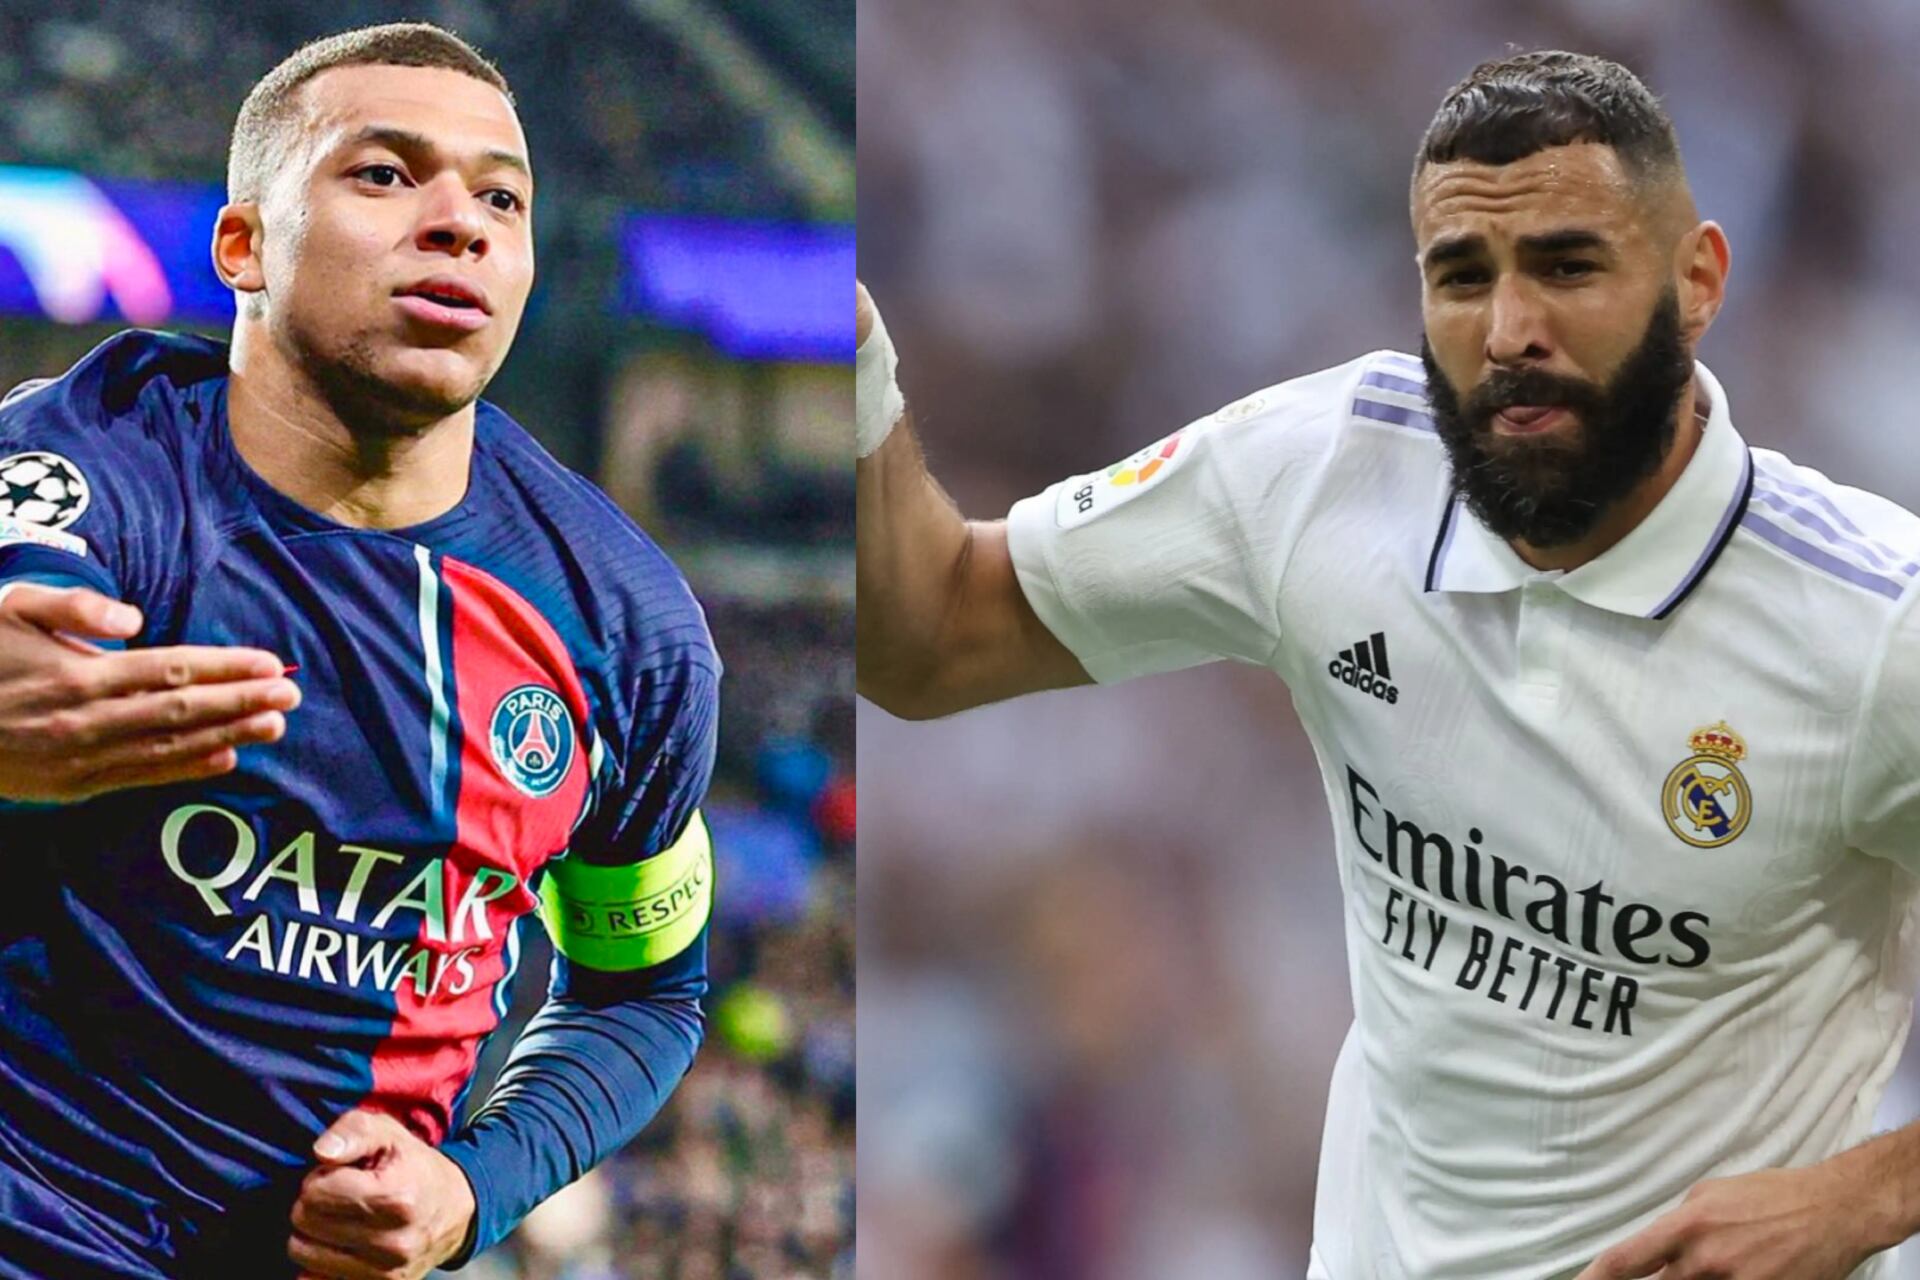 How Kylian Mbappé will follow Karim Benzema's footsteps at Real Madrid